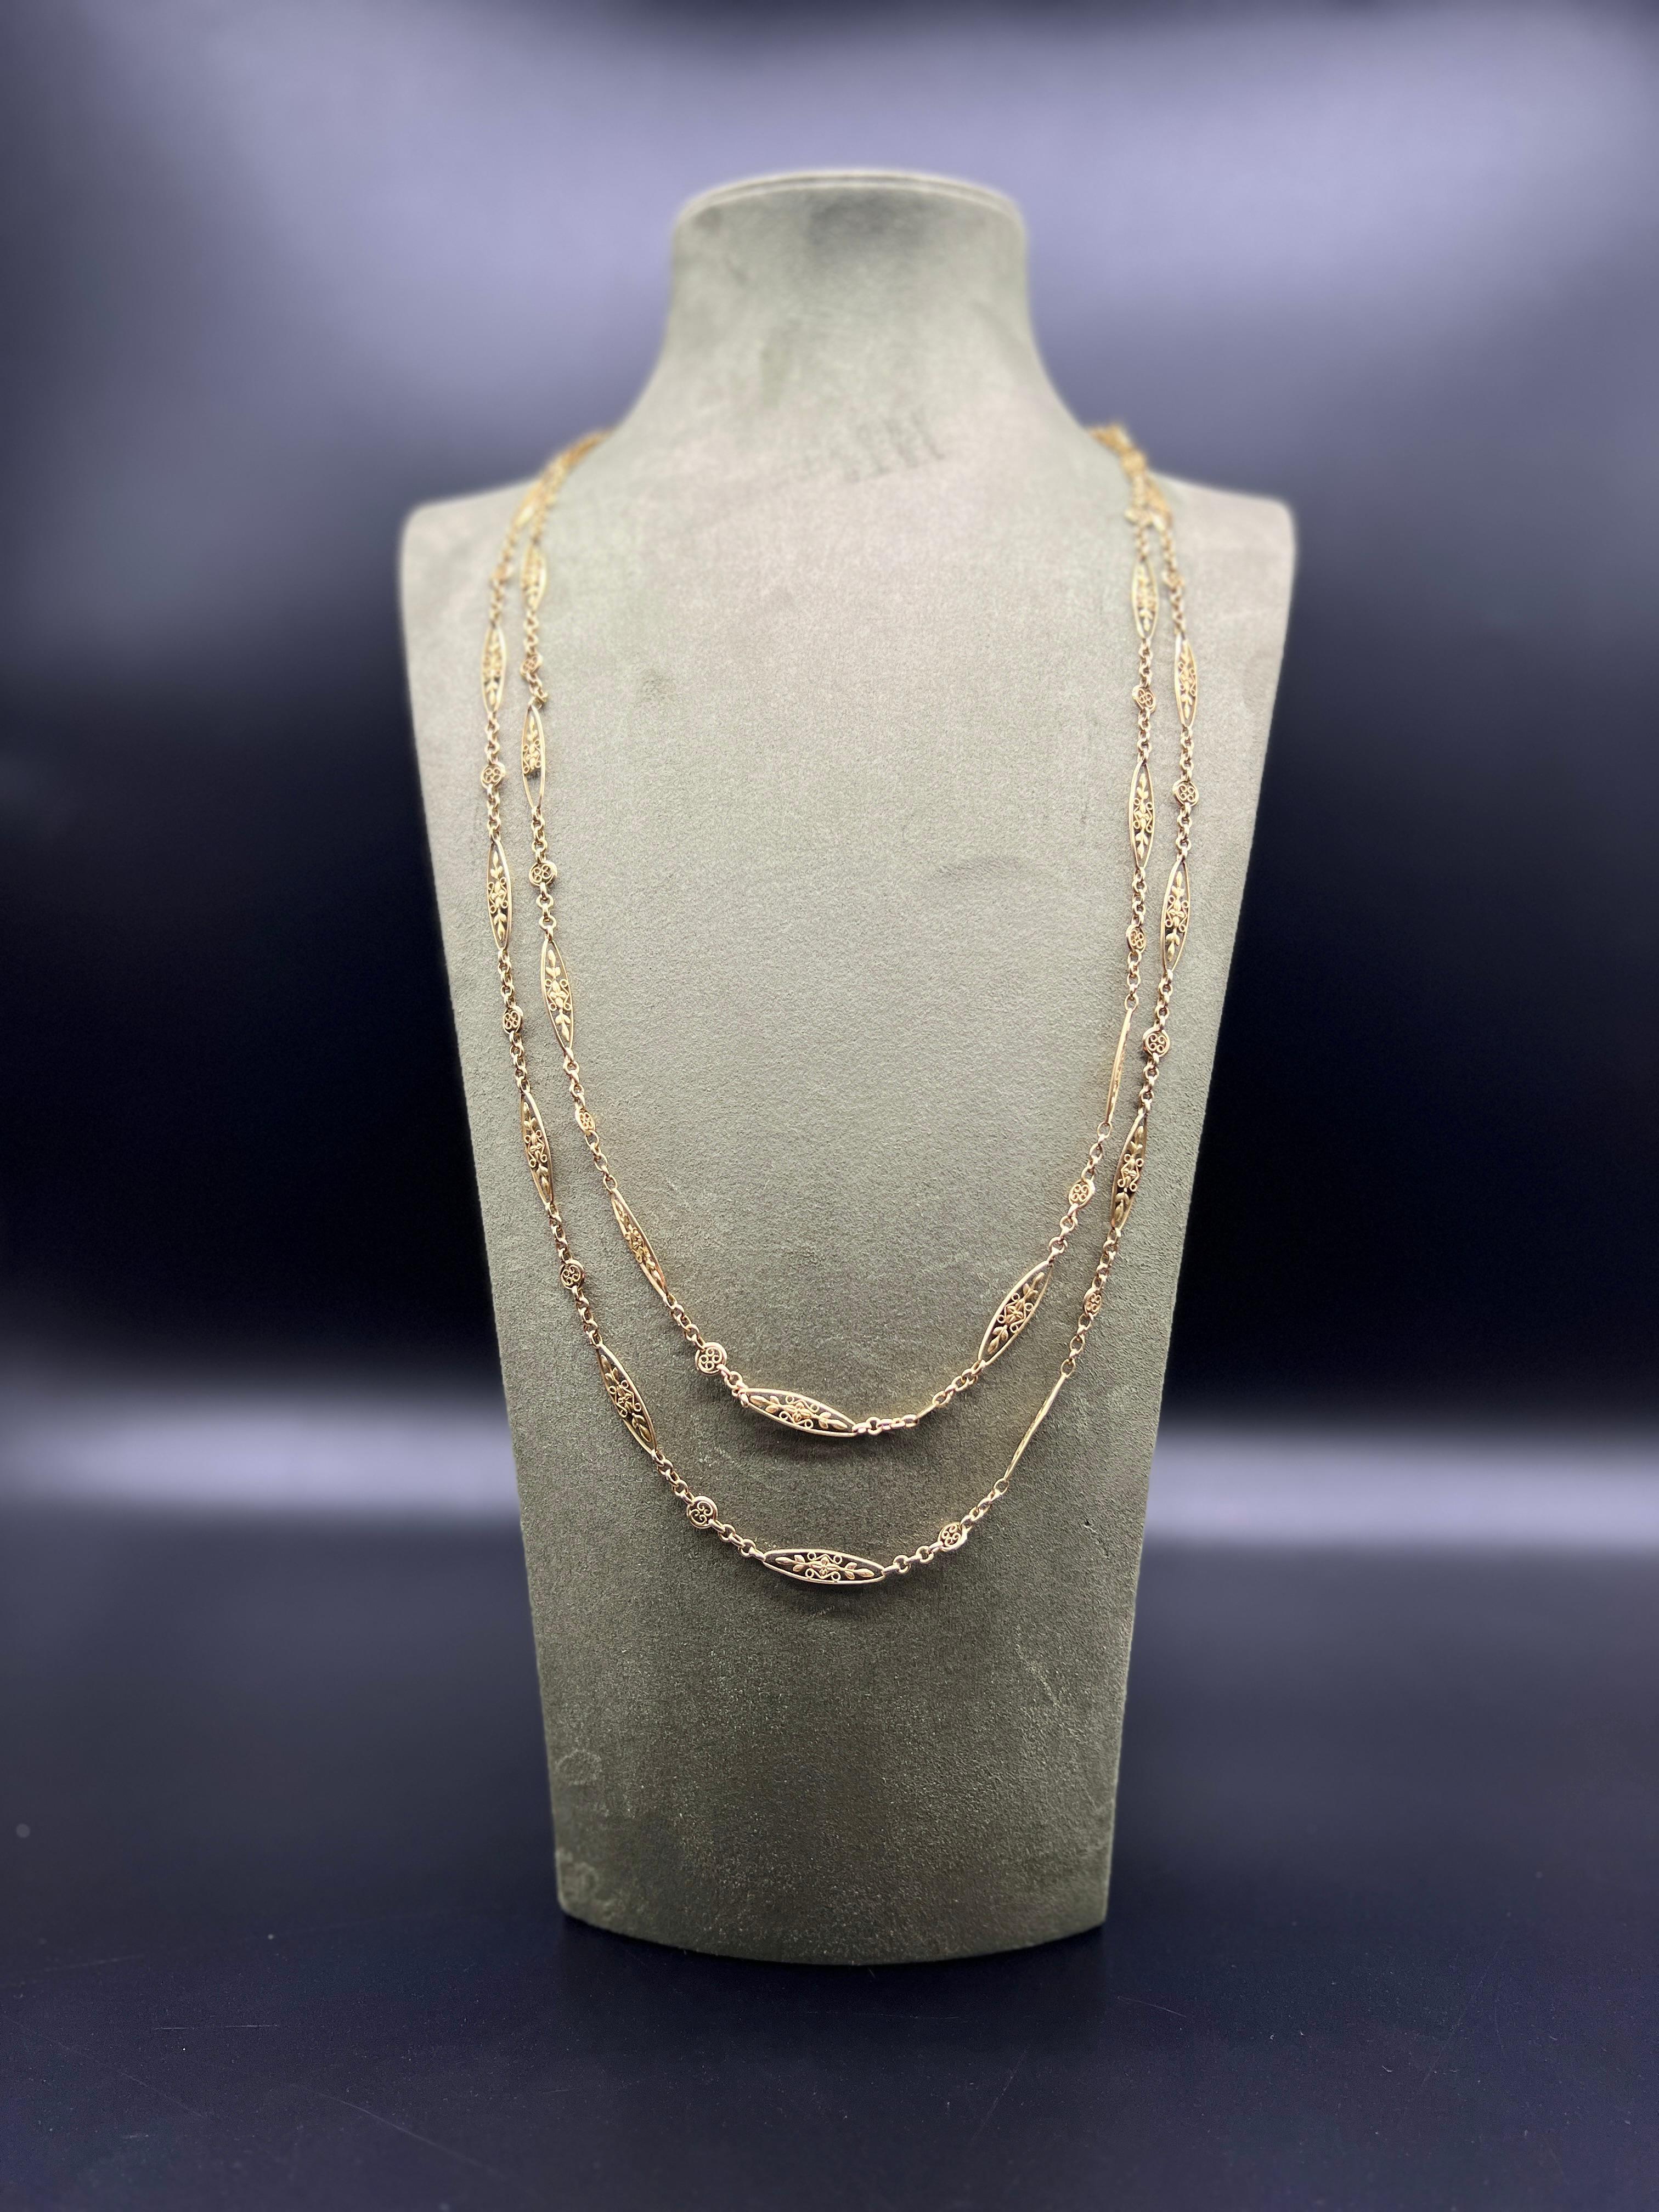 Discover this antique 18k yellow gold link chain, for women looking for an exceptional piece of jewellery. Measuring 148cm in total length and 74cm when closed, this chain offers an elegant and striking presence around the neck.

Its round spring